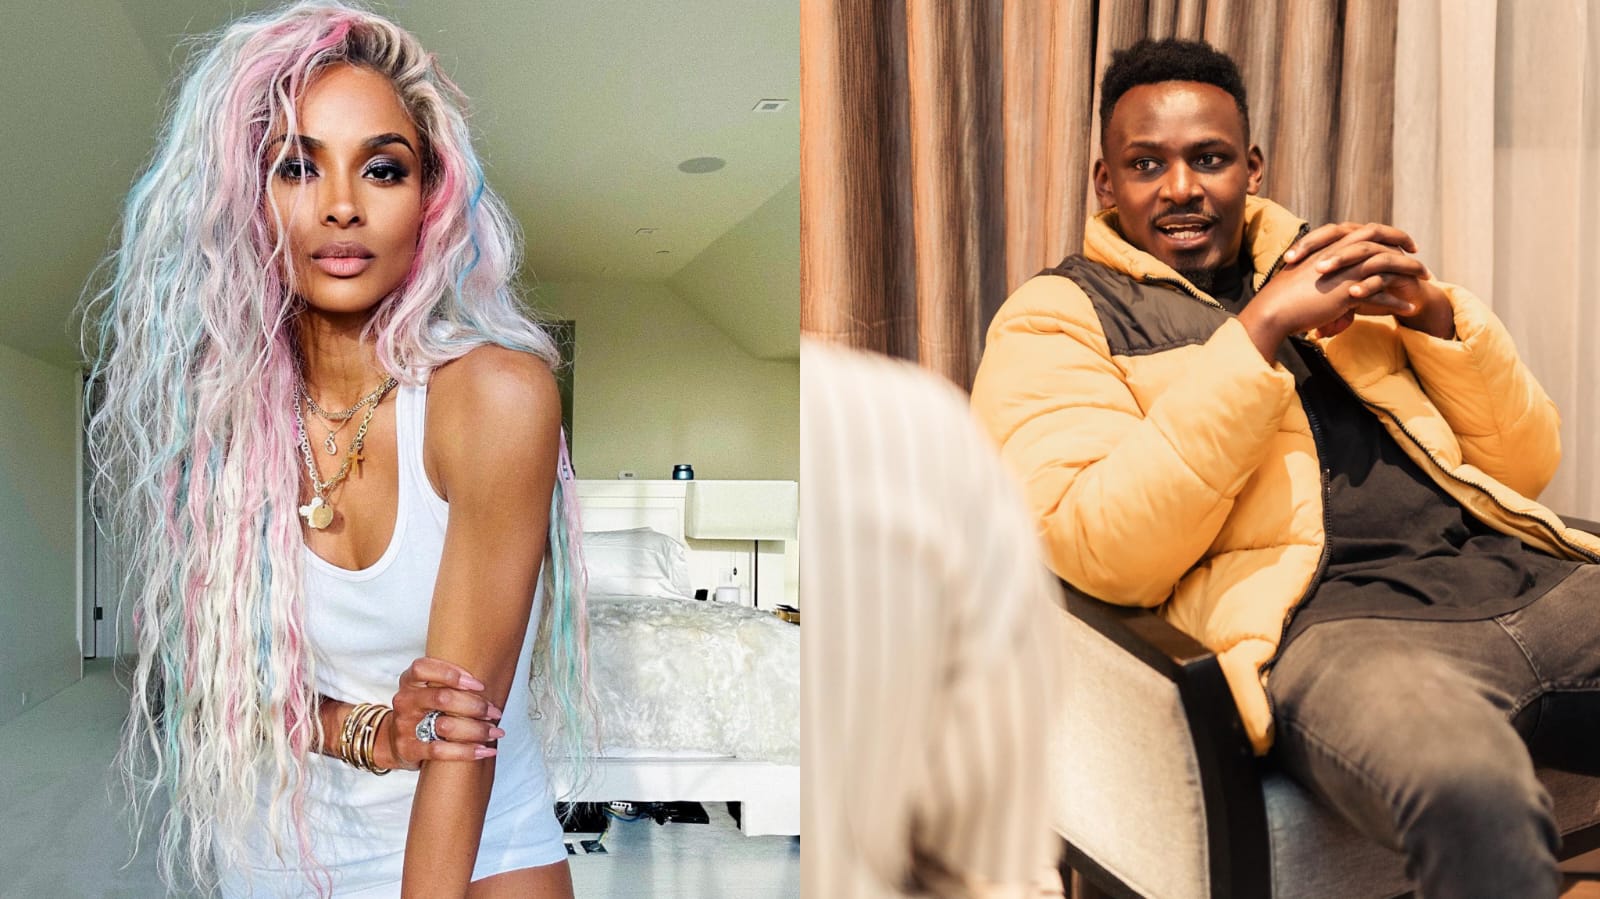 American Singer and Songwriter Ciara Co-Signs Kenyan Singer Okello Max After His Viral 'How We Roll' Remix #Ciara